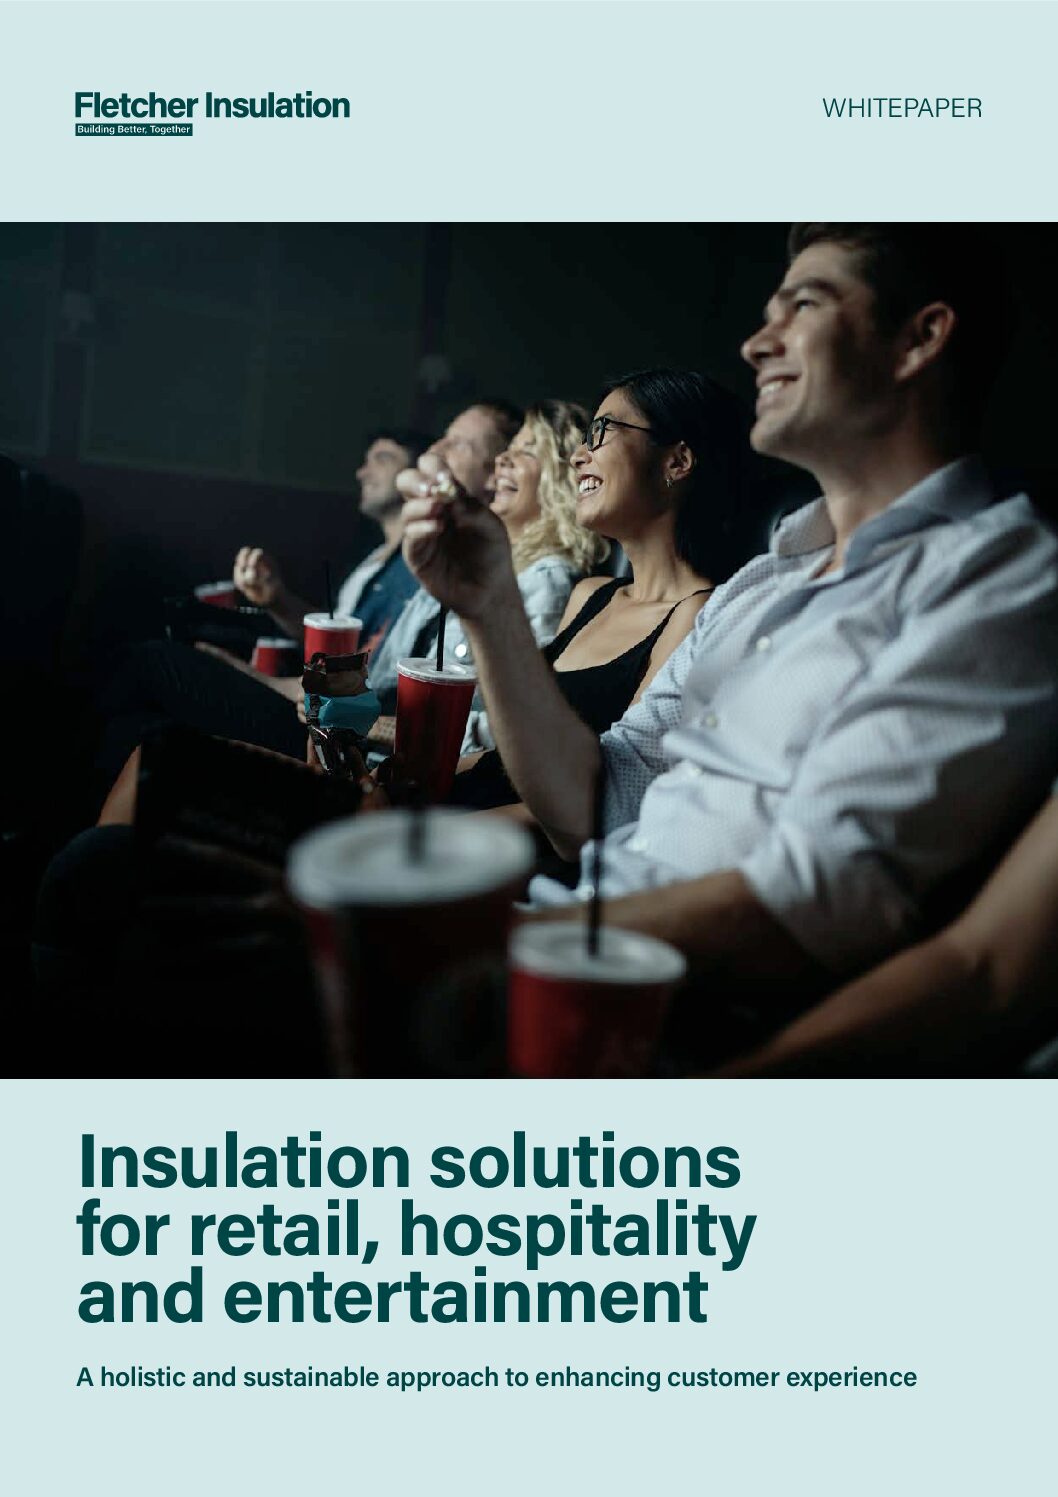 Whitepaper – Insulation Solutions for Retail Hospitality & Entertainment